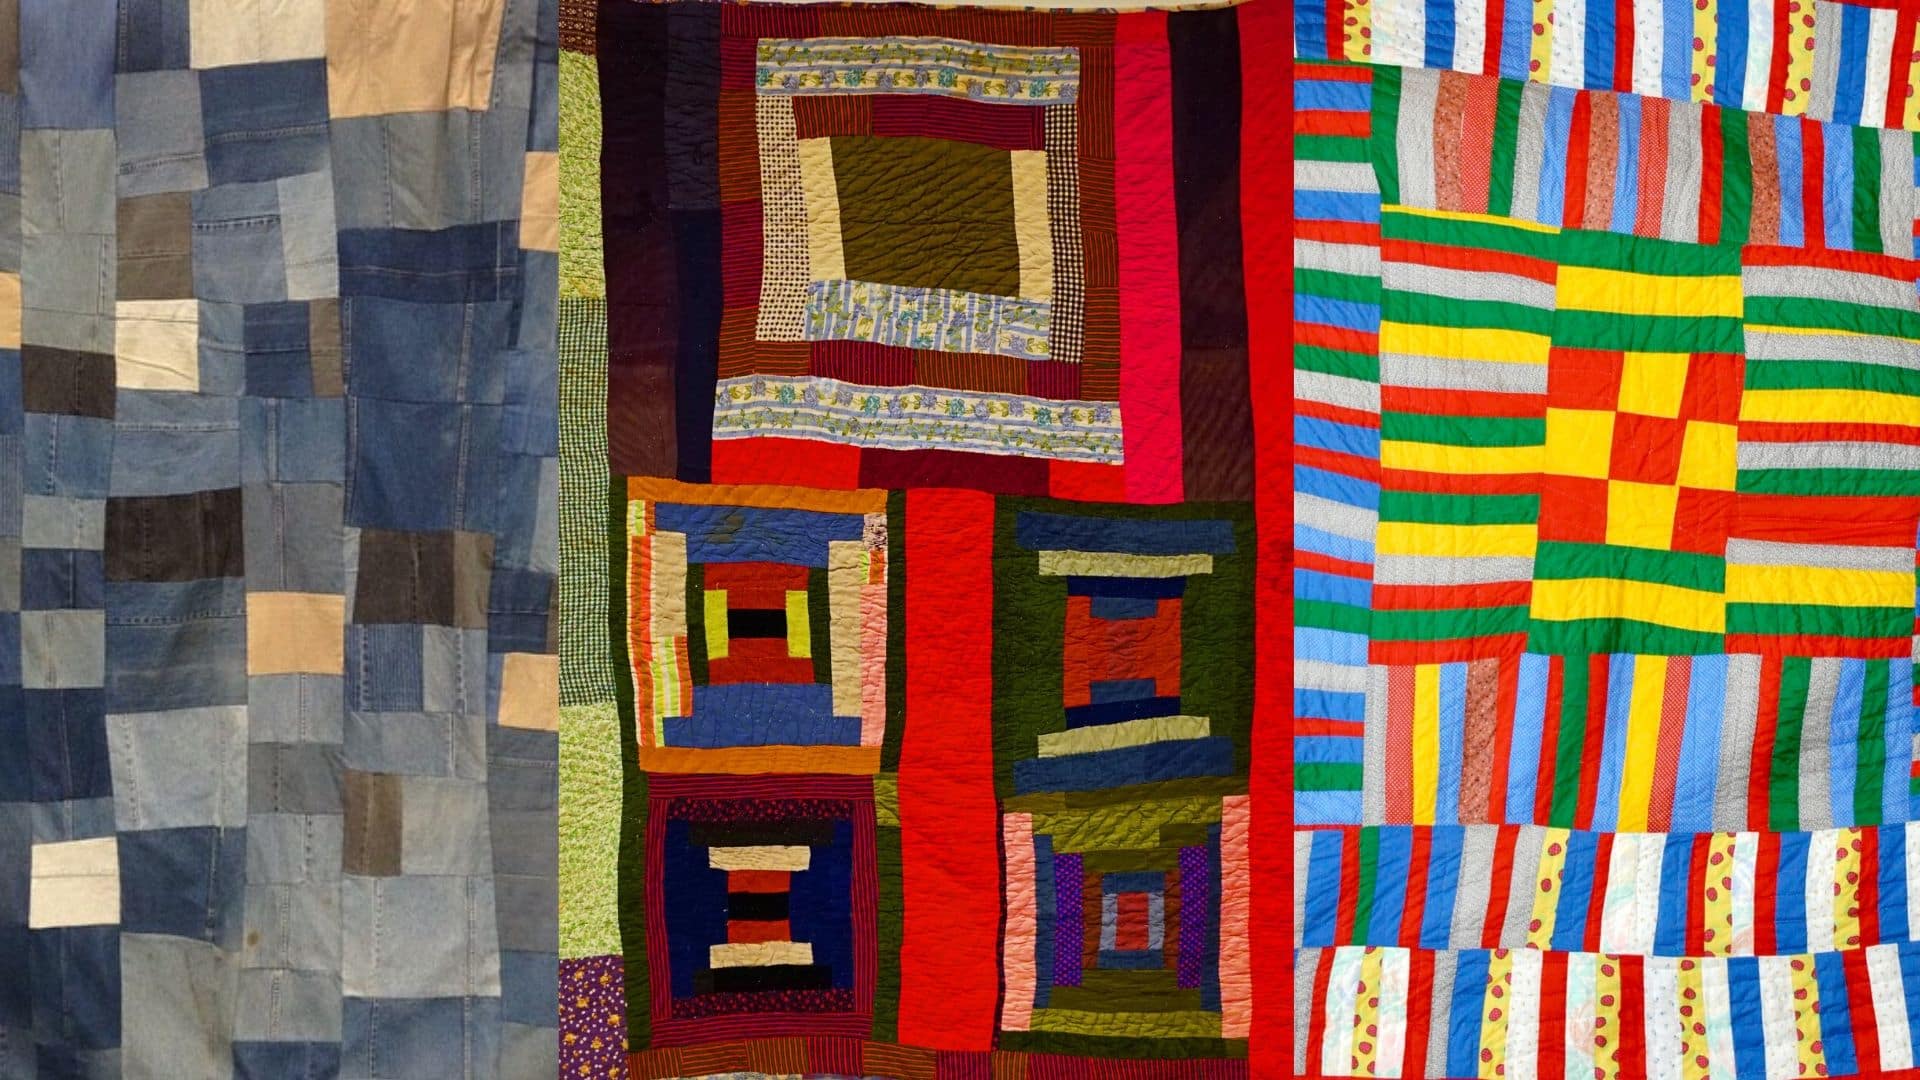 Image: collaged image of 3 Gee's bend quilts made of various colors of fabric